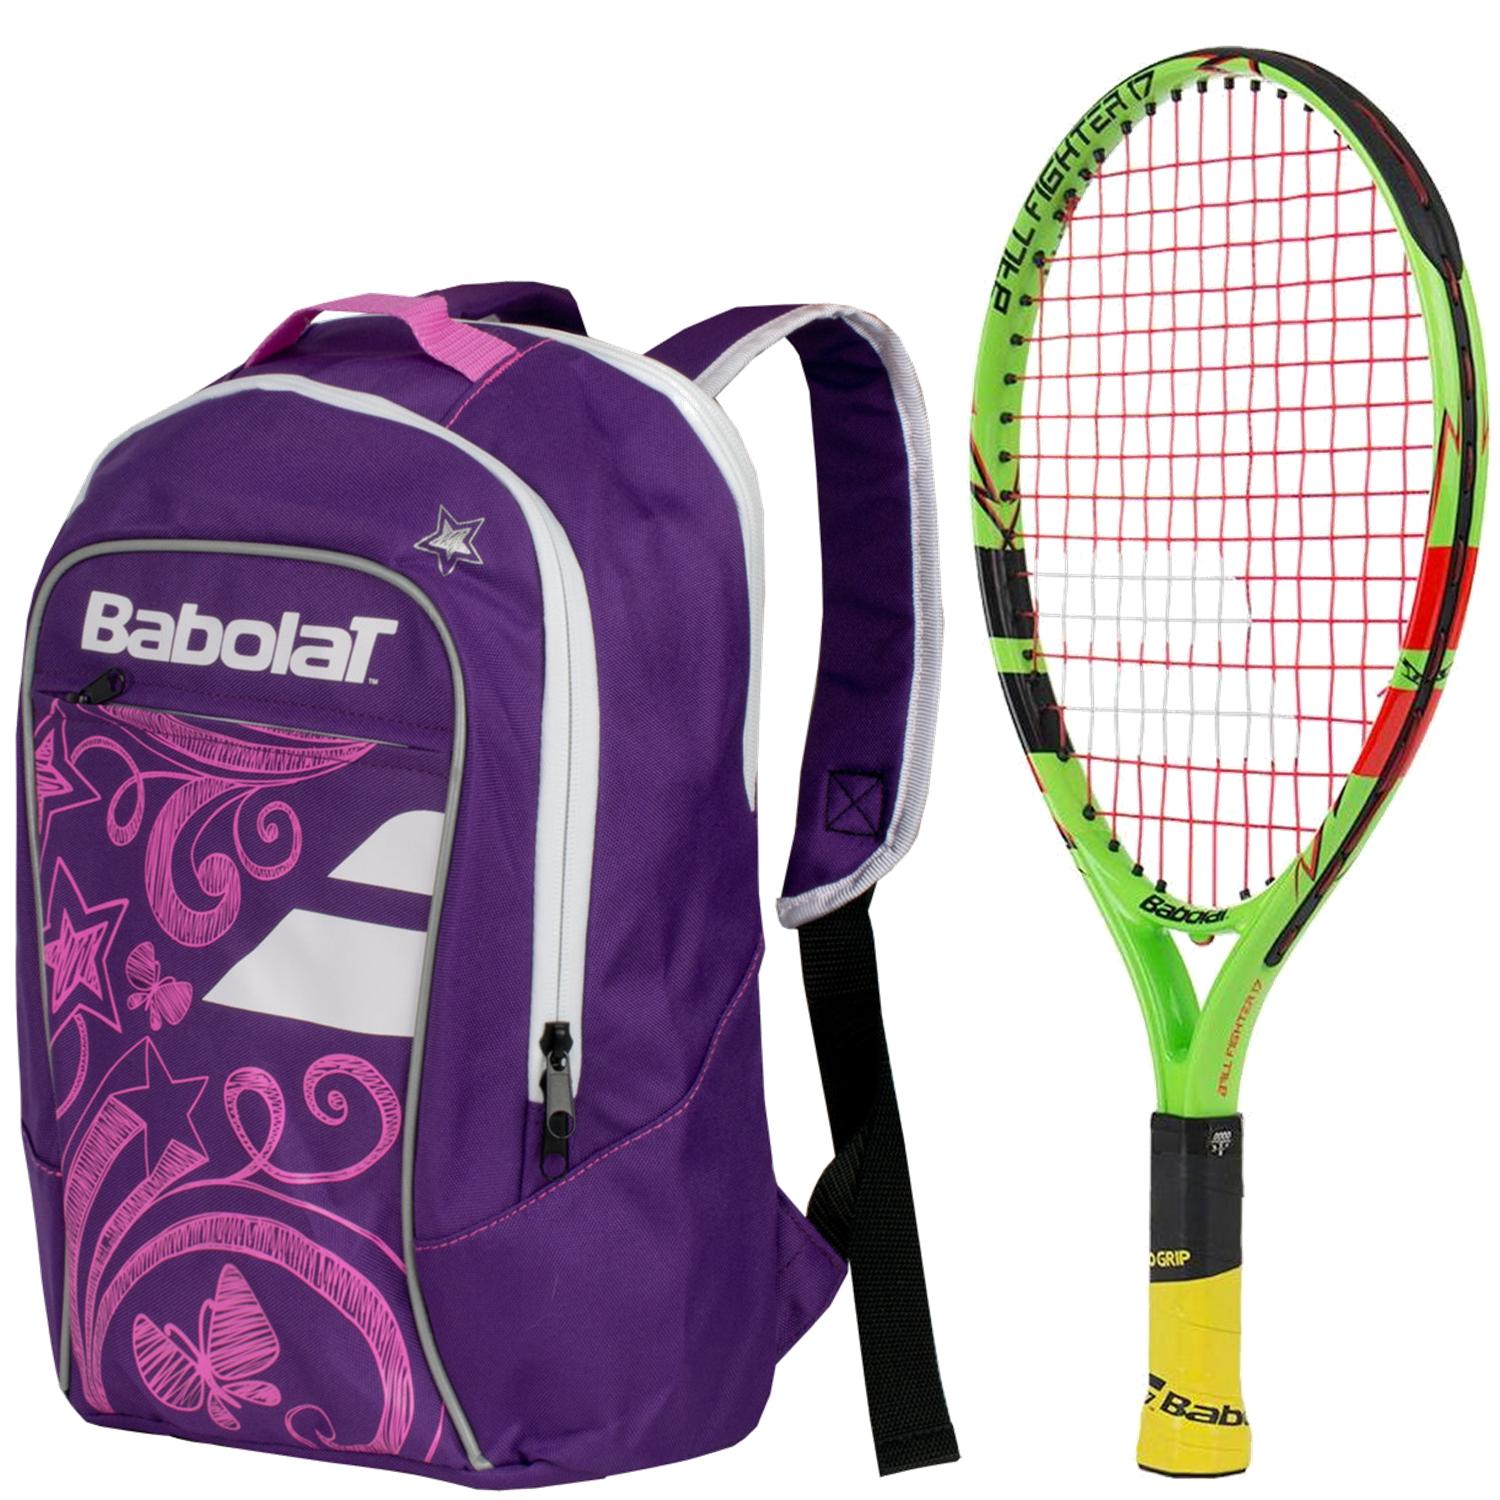 Babolat Ballfighter 17 Inch Child&apos;s Tennis Racquet with a Purple Junior Tennis Backpack